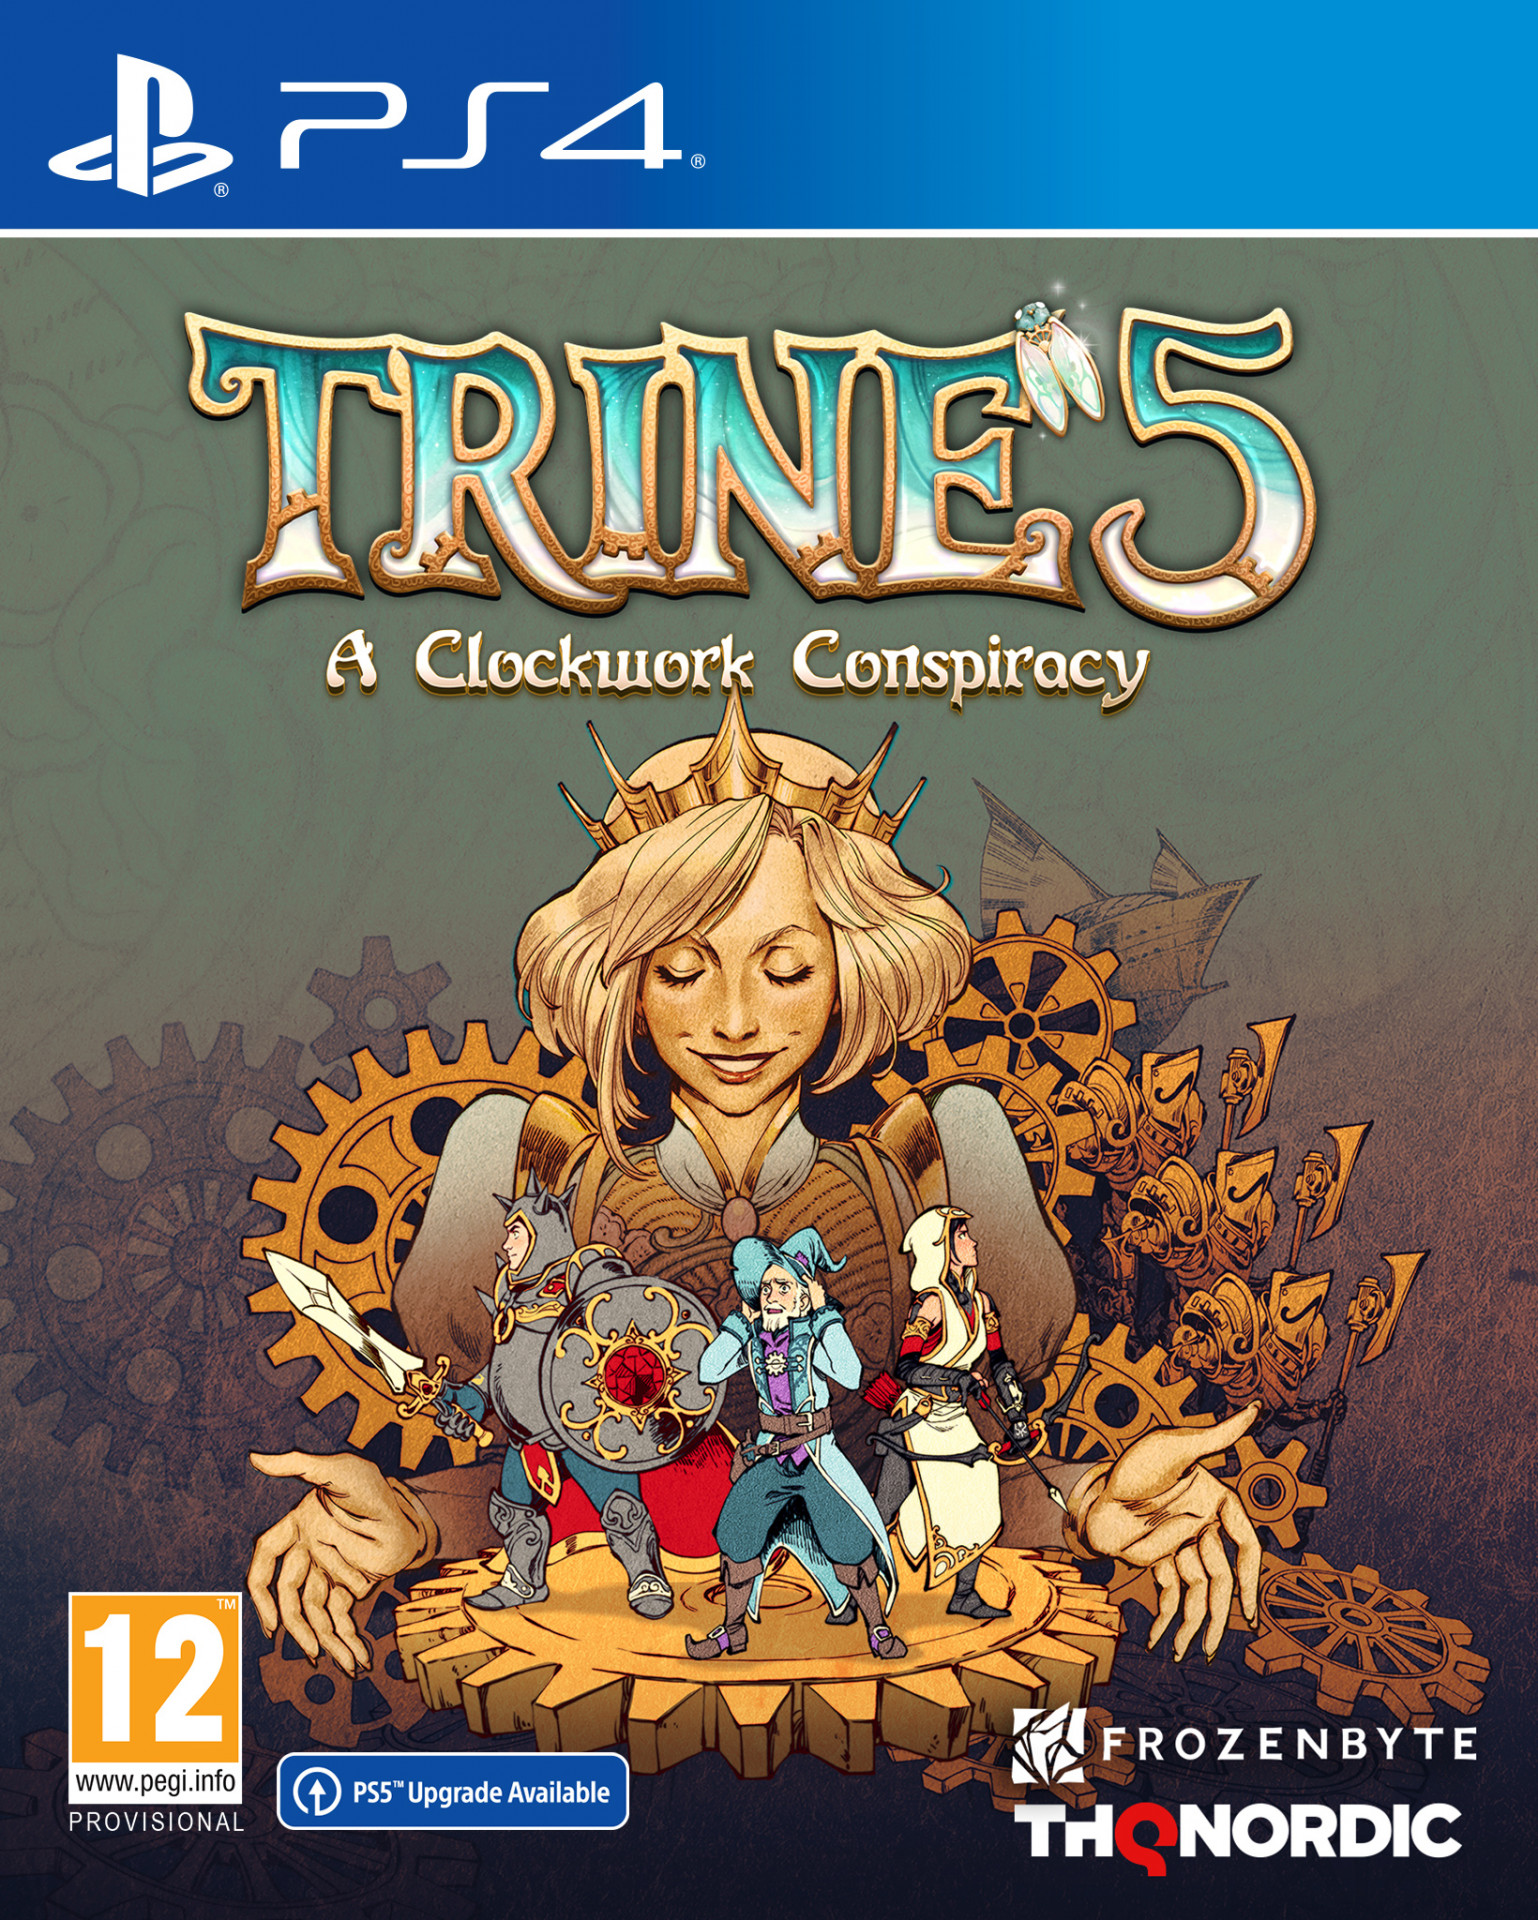 Trine 5: A Clockwork Conspiracy (PS4), THQ Nordic